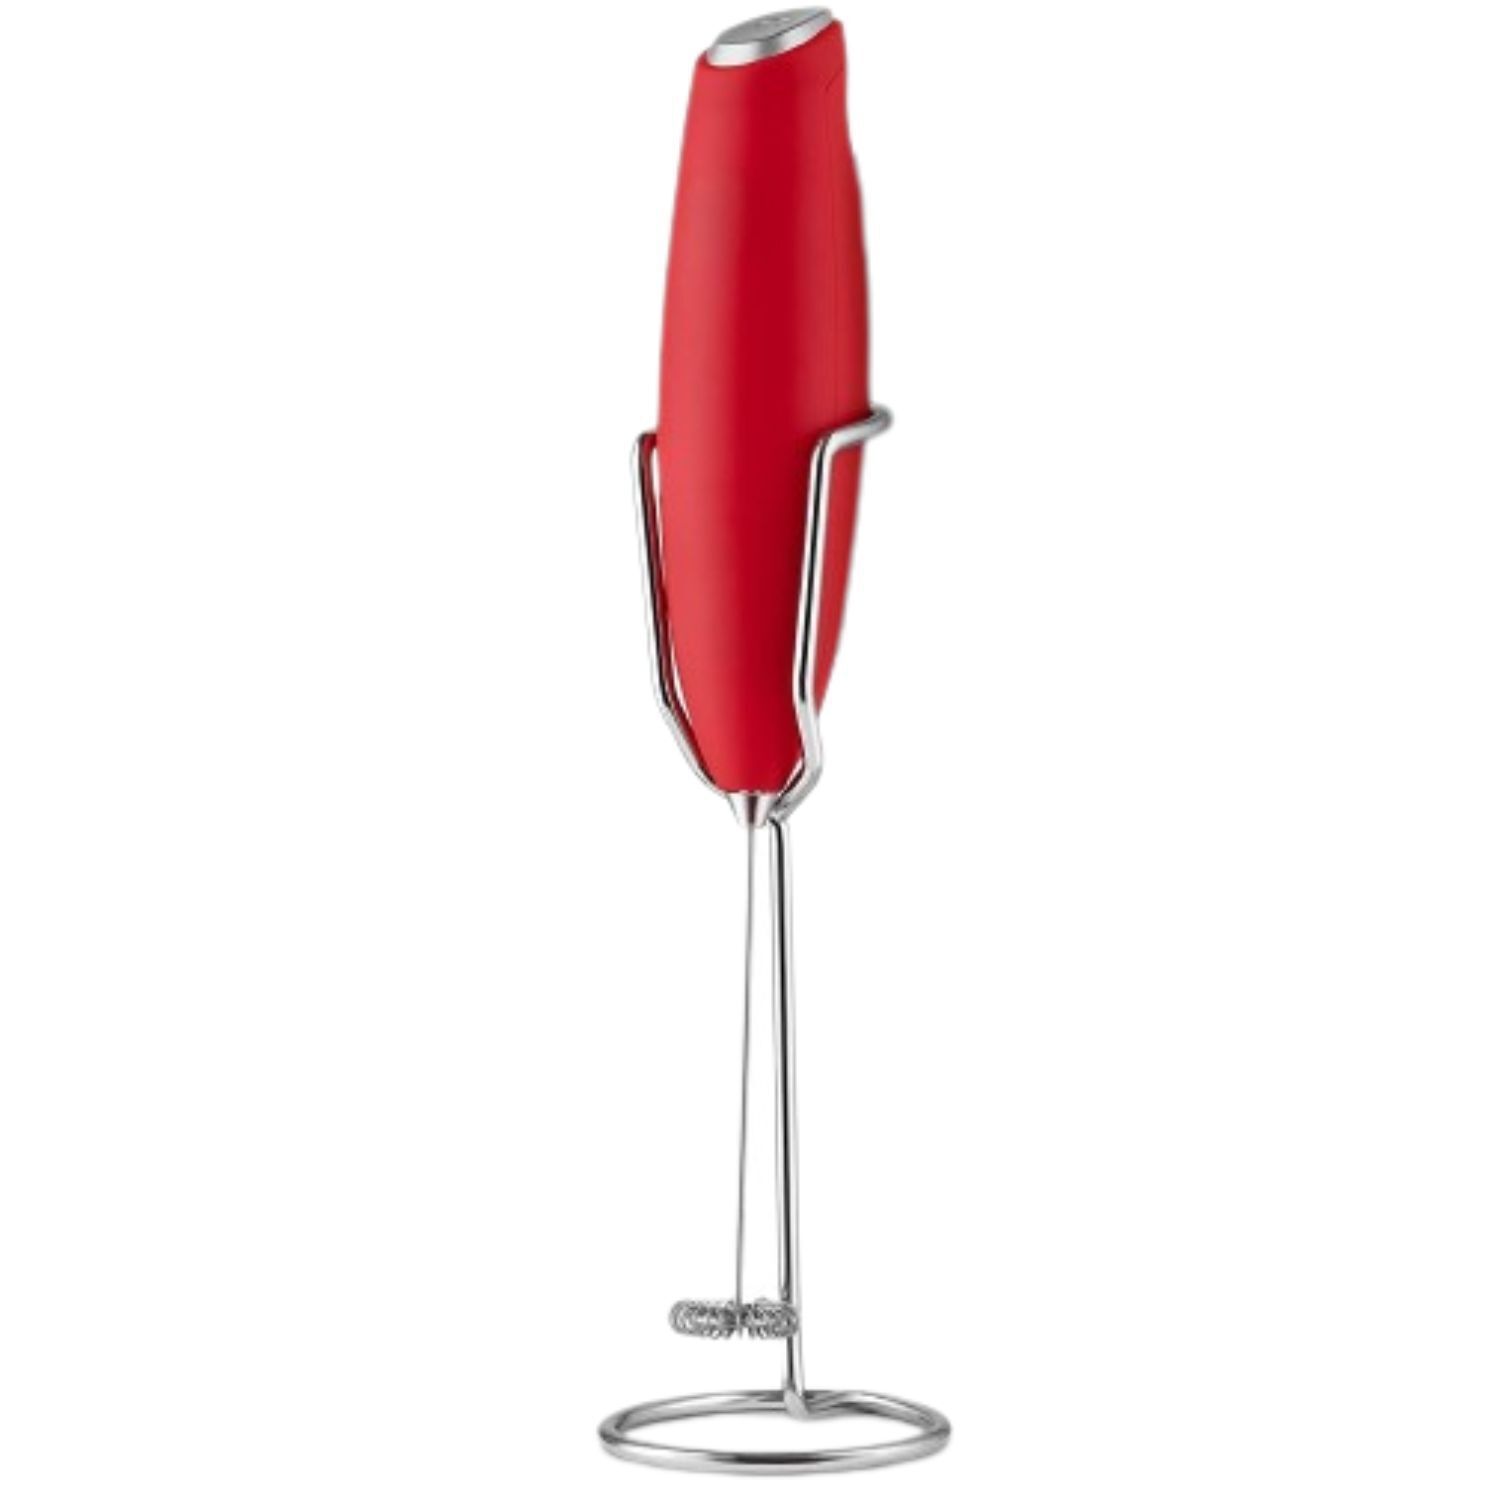 Zulay Powerful Milk Frother Handheld Foam Maker for Lattes - Red Blend, 1 -  Kroger